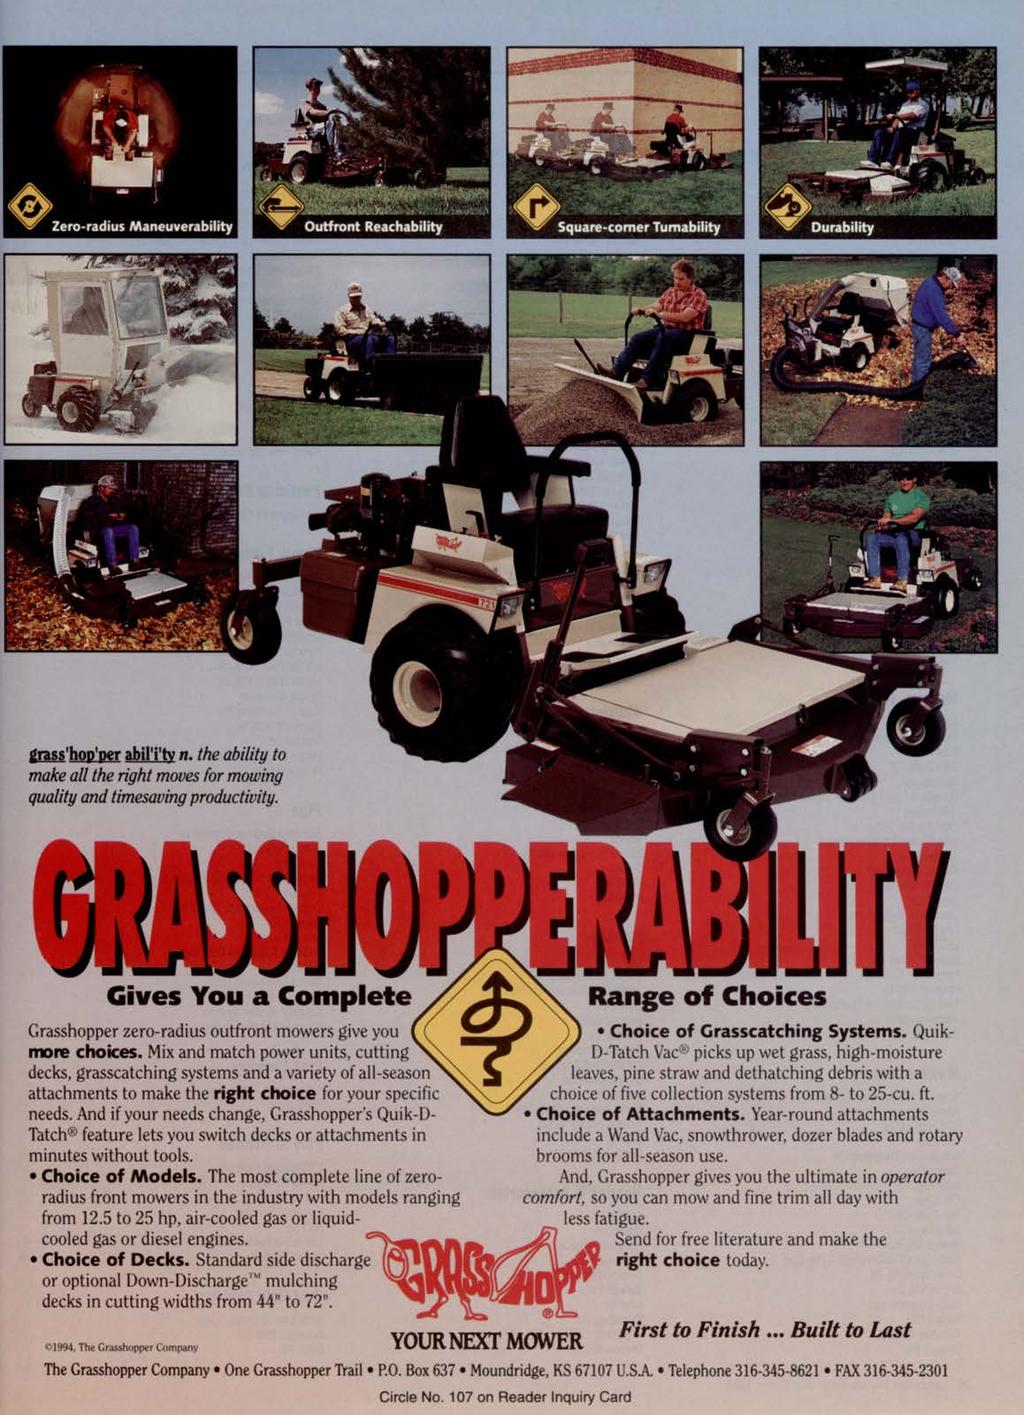 grass'hop'per abil i ty n. the ability to make all the right moves for mowing quality and timesaving productivity. Gives You a Complete Grasshopper zero-radius outfront mowers give you more chokes.